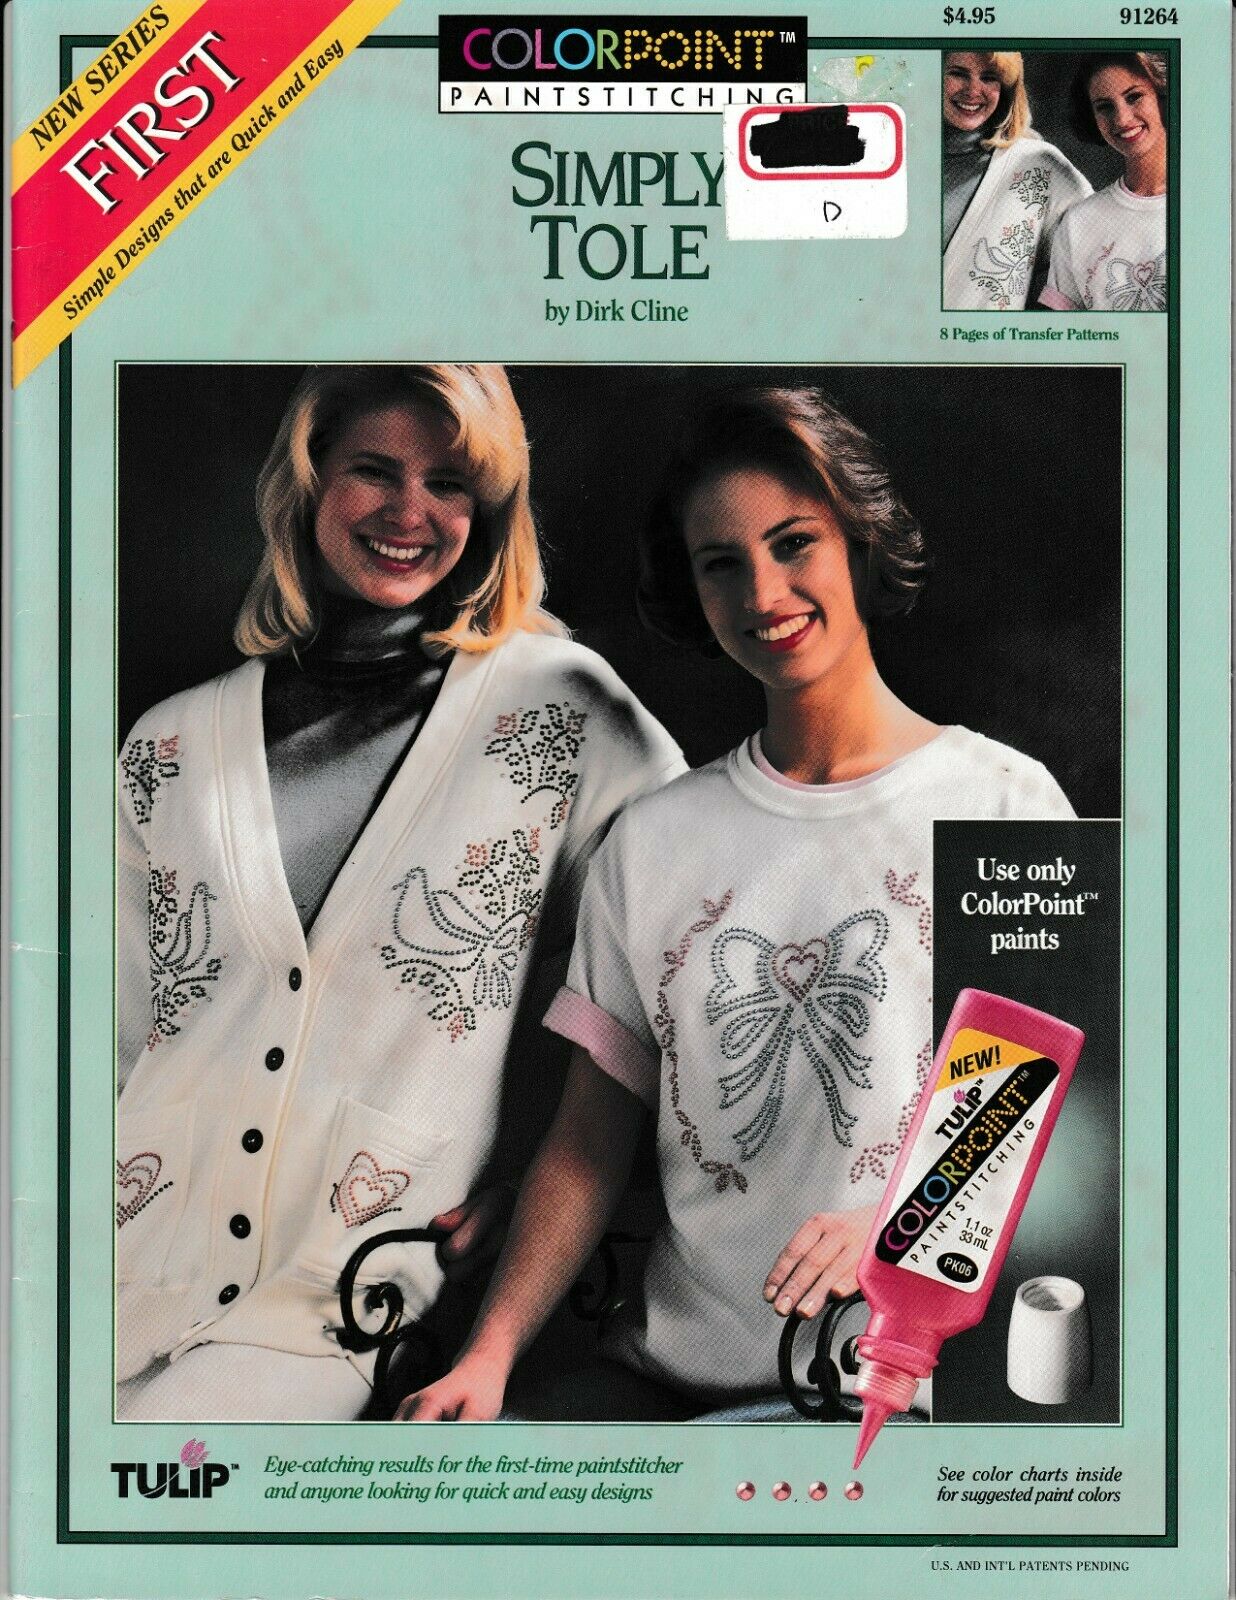 Simply Tole Transfer Patterns | Colorpoint Paintstitching #91264